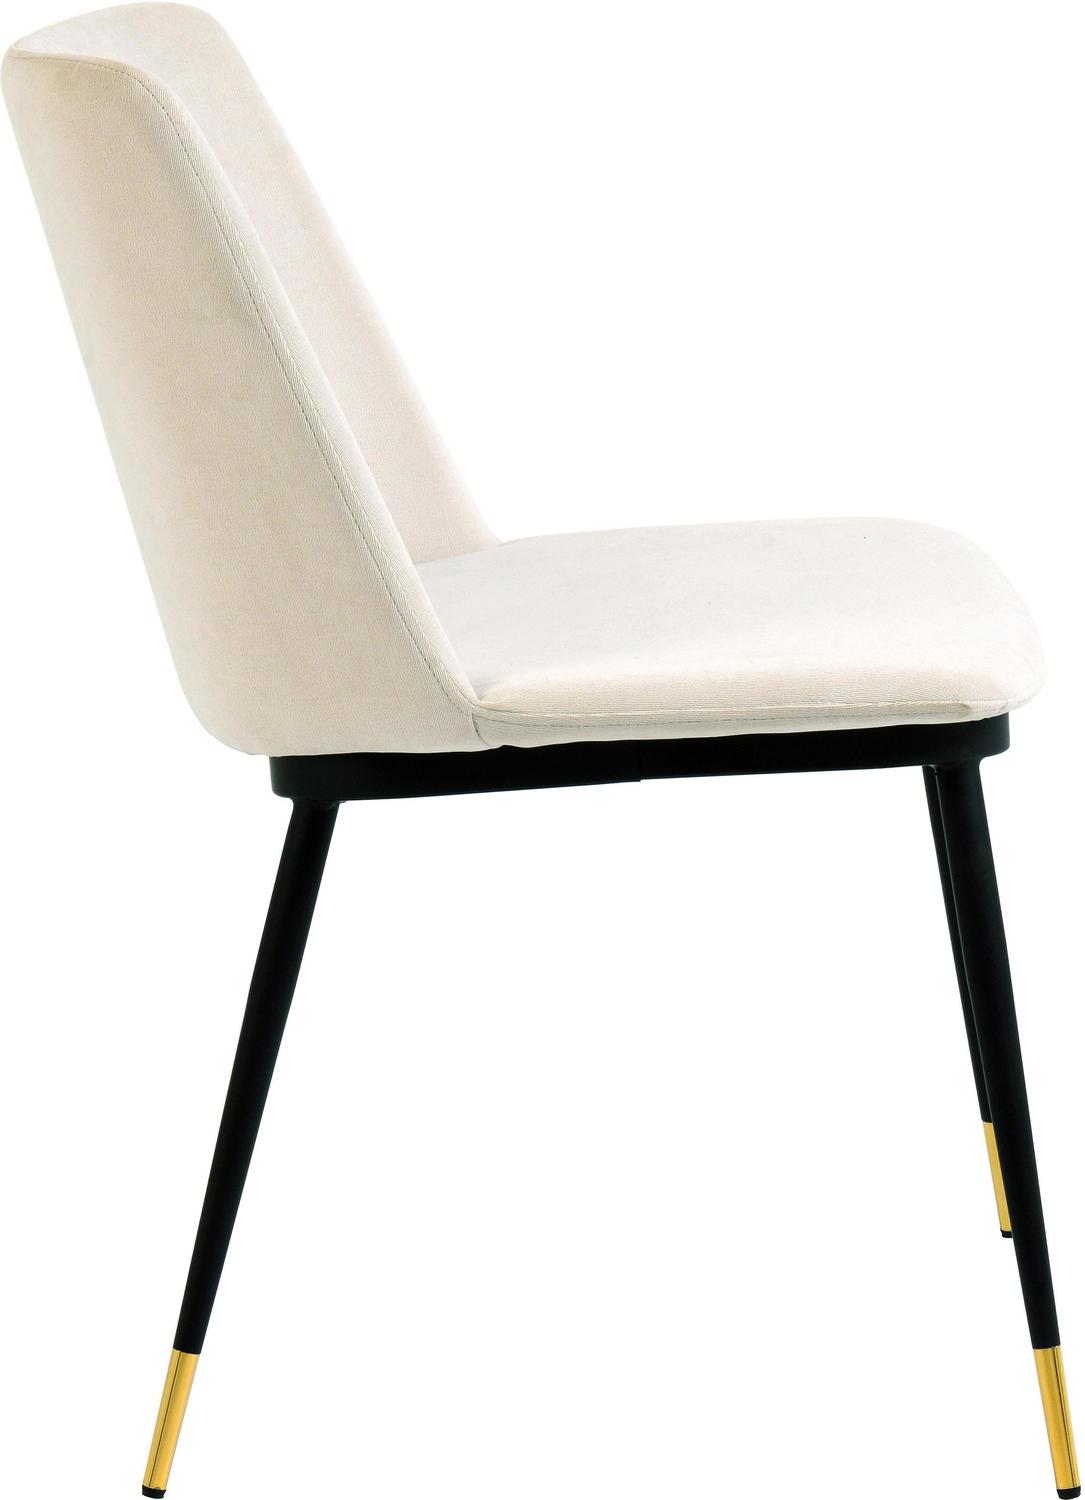 upholstered dining chairs with arms set of 2 Tov Furniture Dining Chairs Cream